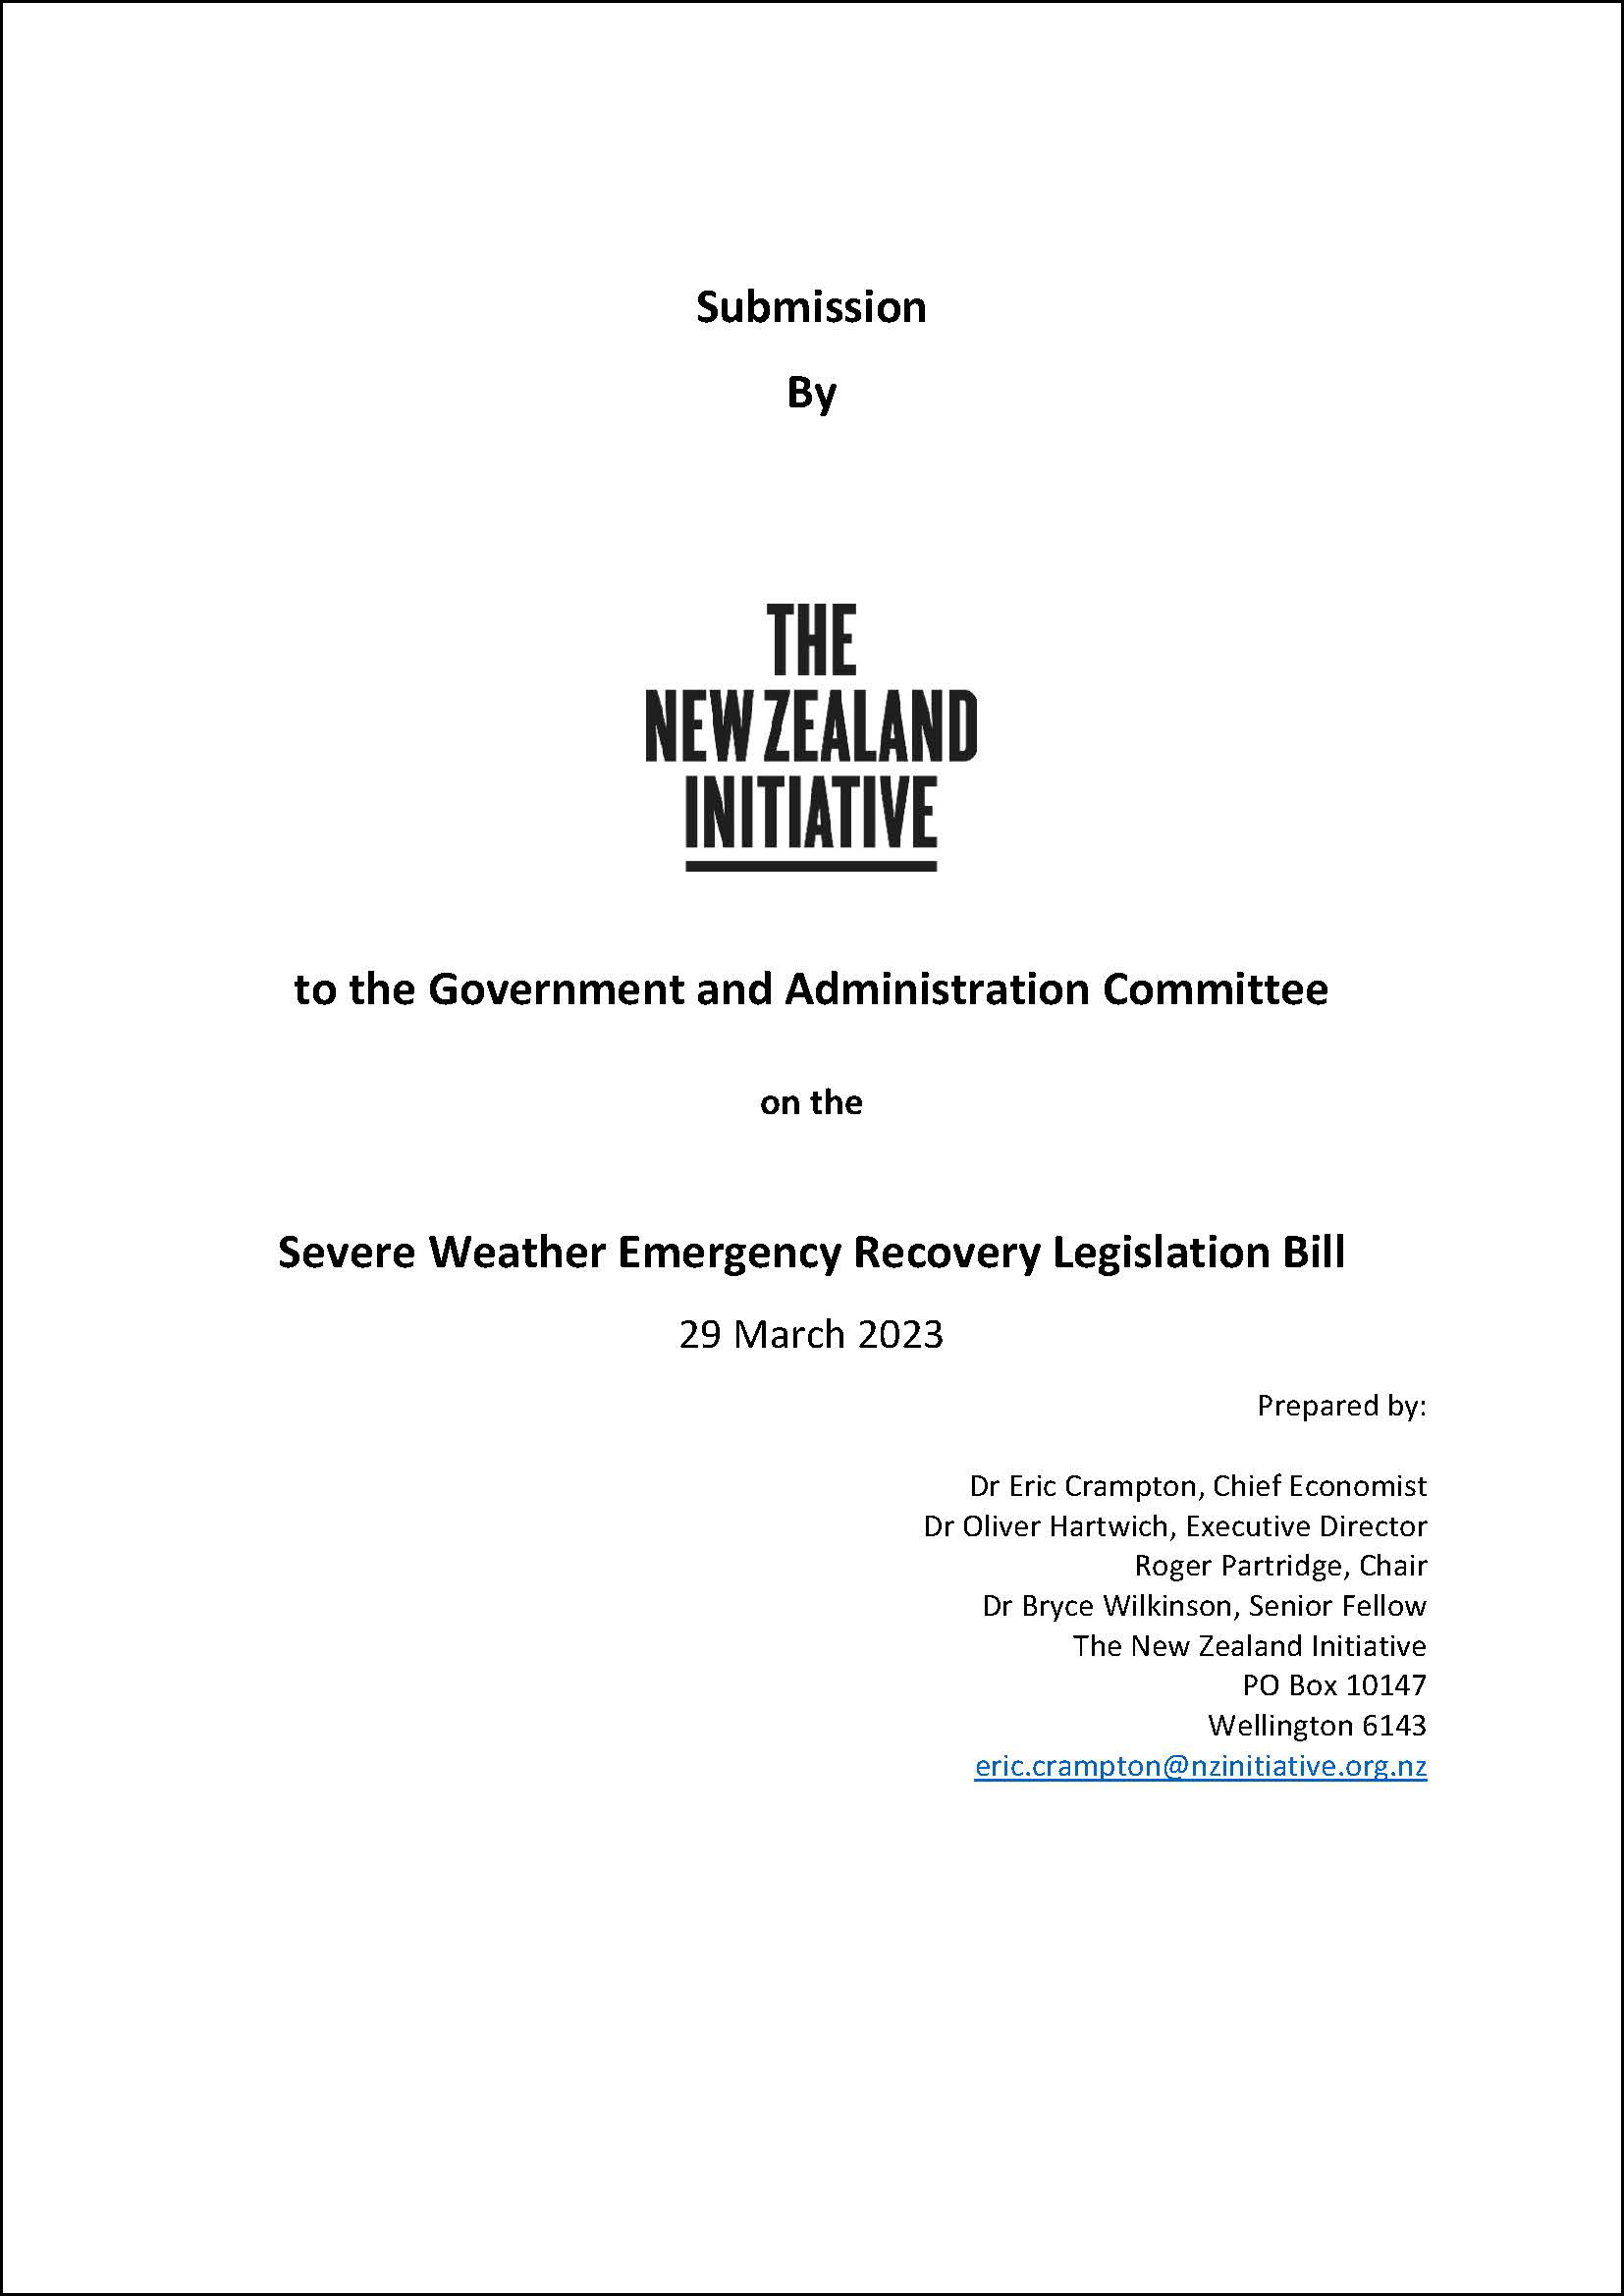 Submission on the Severe Weather Emergency Recovery Legislation Bill cover